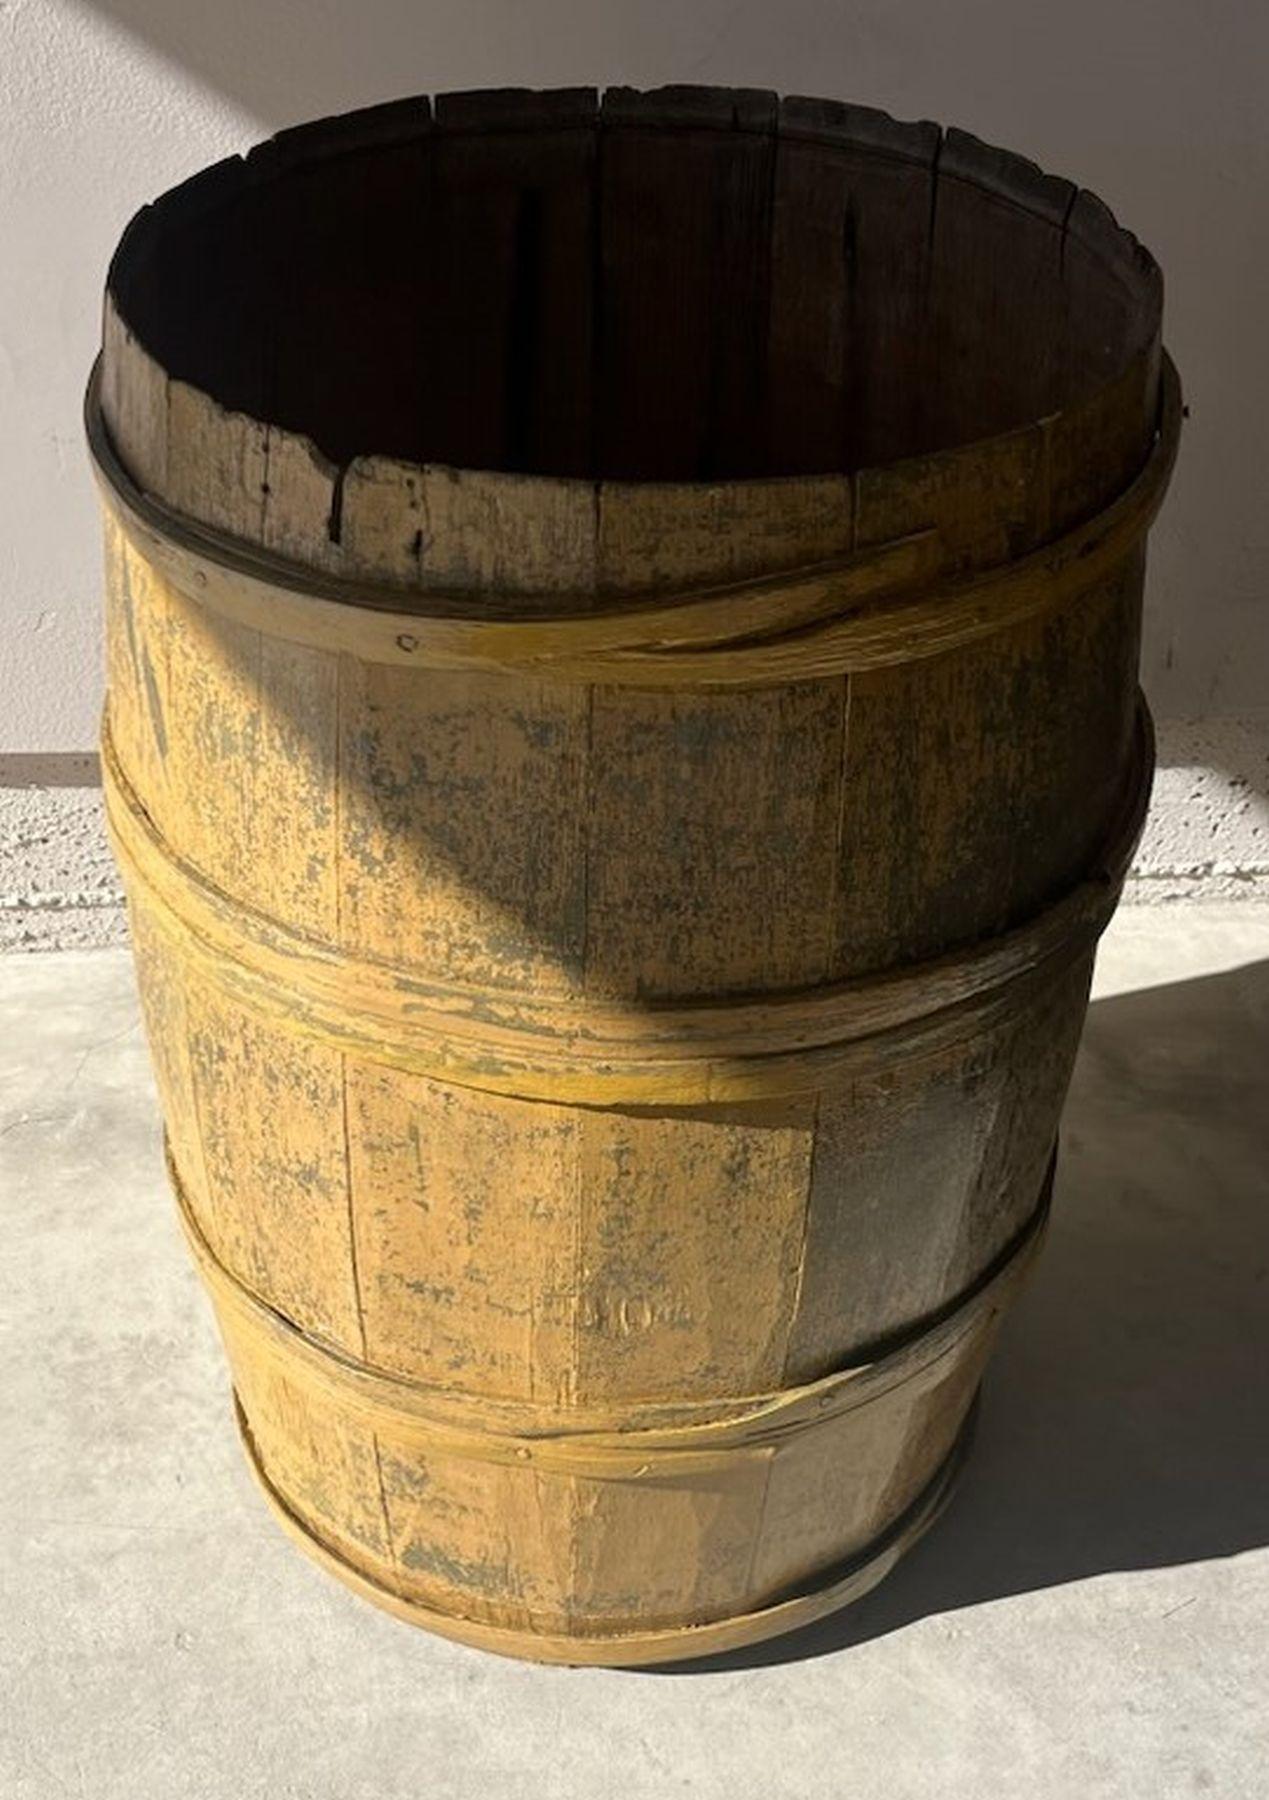 This folky original mustard painted over grey barrel was found on a farm in Pennsylvania. The condition is very good and sturdy. The patina is amazing and it has a outdoor protective coating for protection of bad weather.